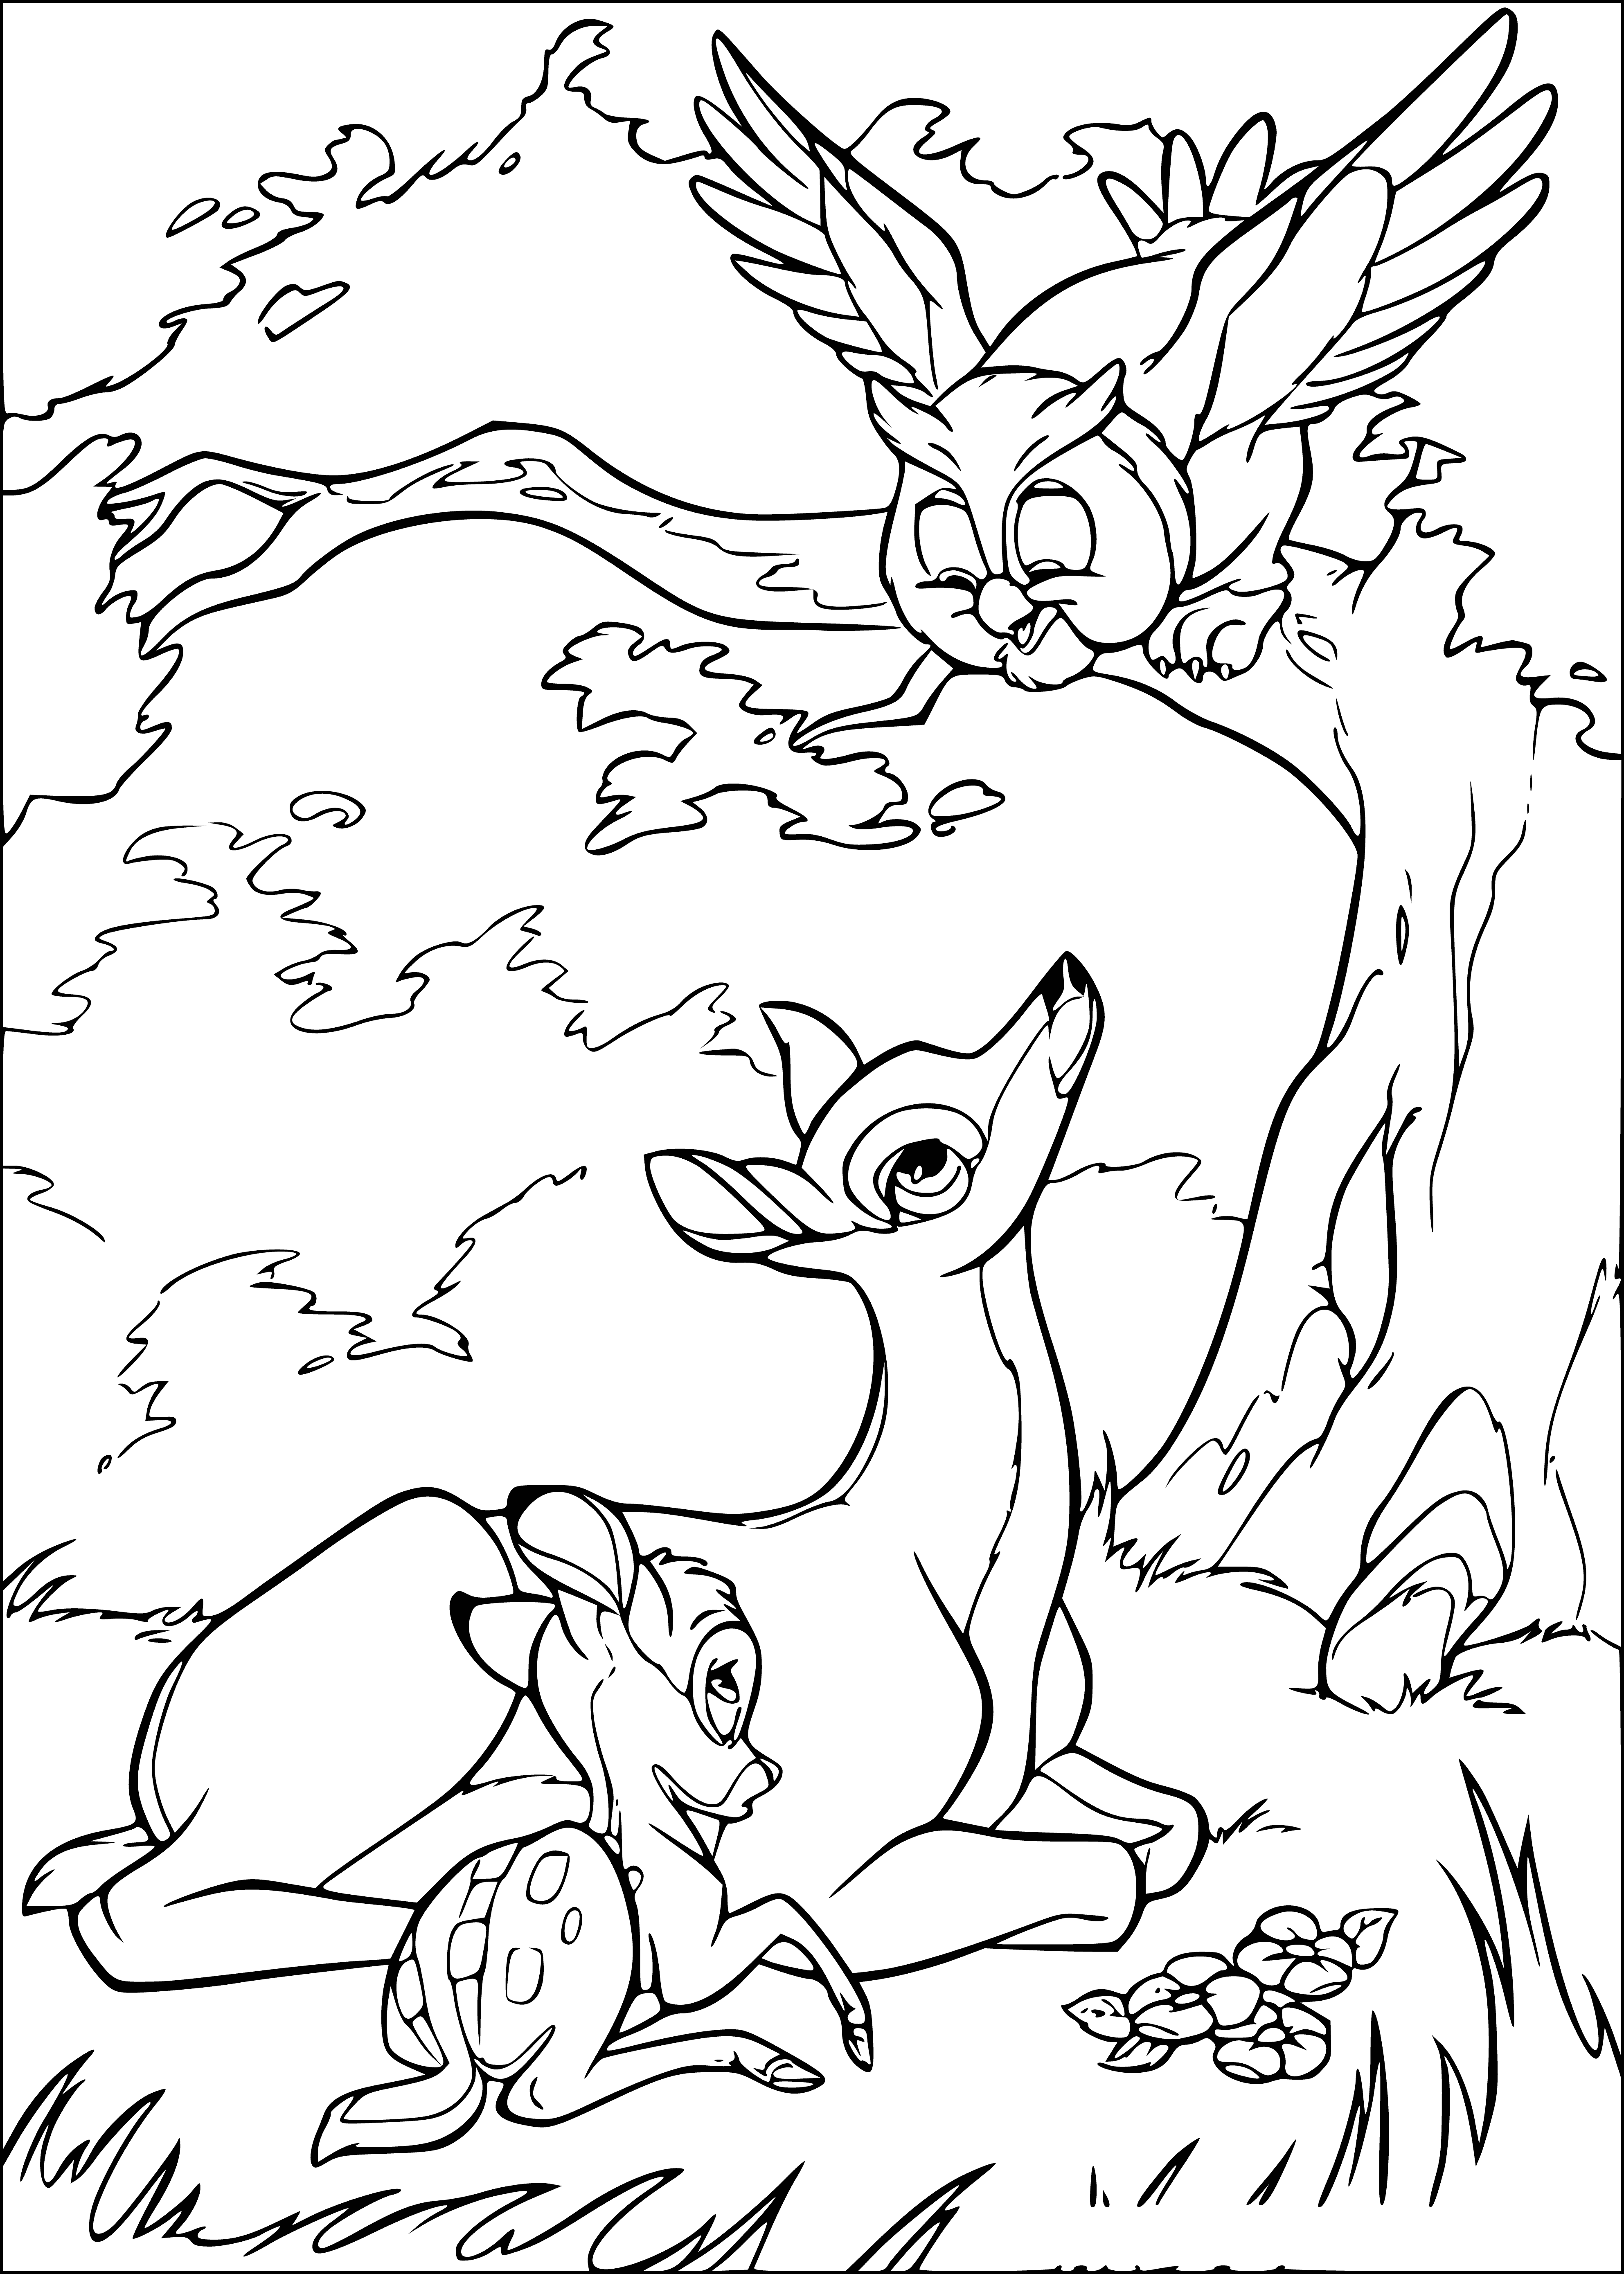 coloring page: Young fawn Bambi lies on his mother's stomach, each with a curious/gentle expression on their face--his eyes looking off to the side.